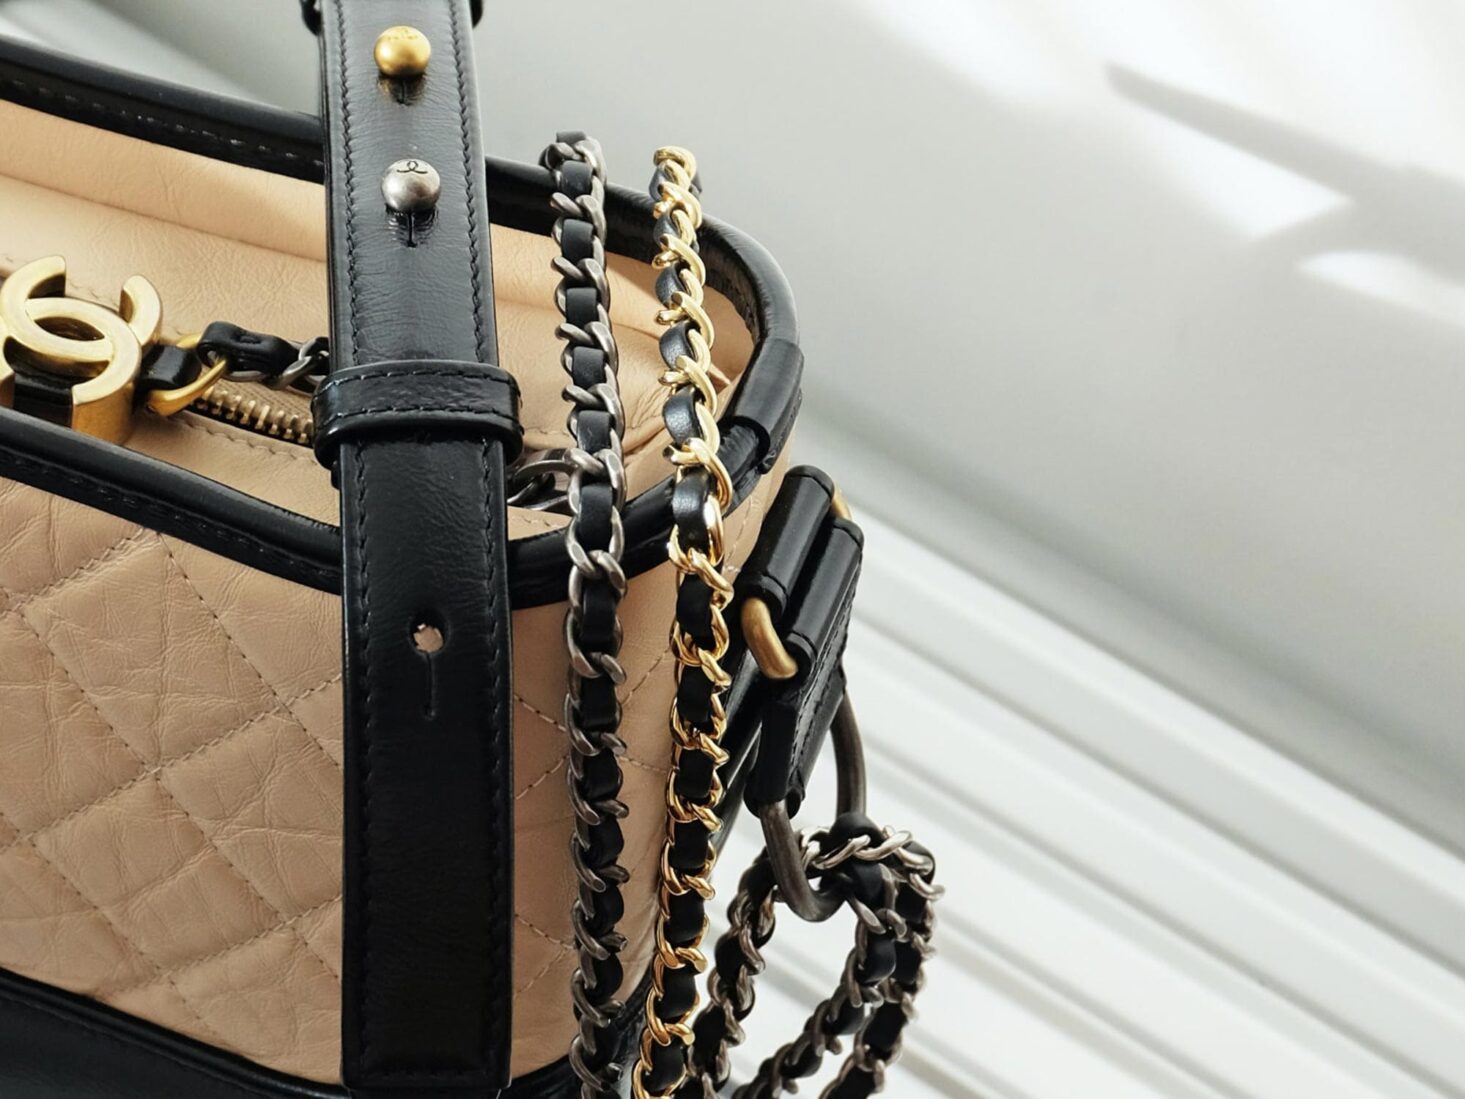 17 of the Best Luxury Handbag Brands You Need to Know - Life with Mar